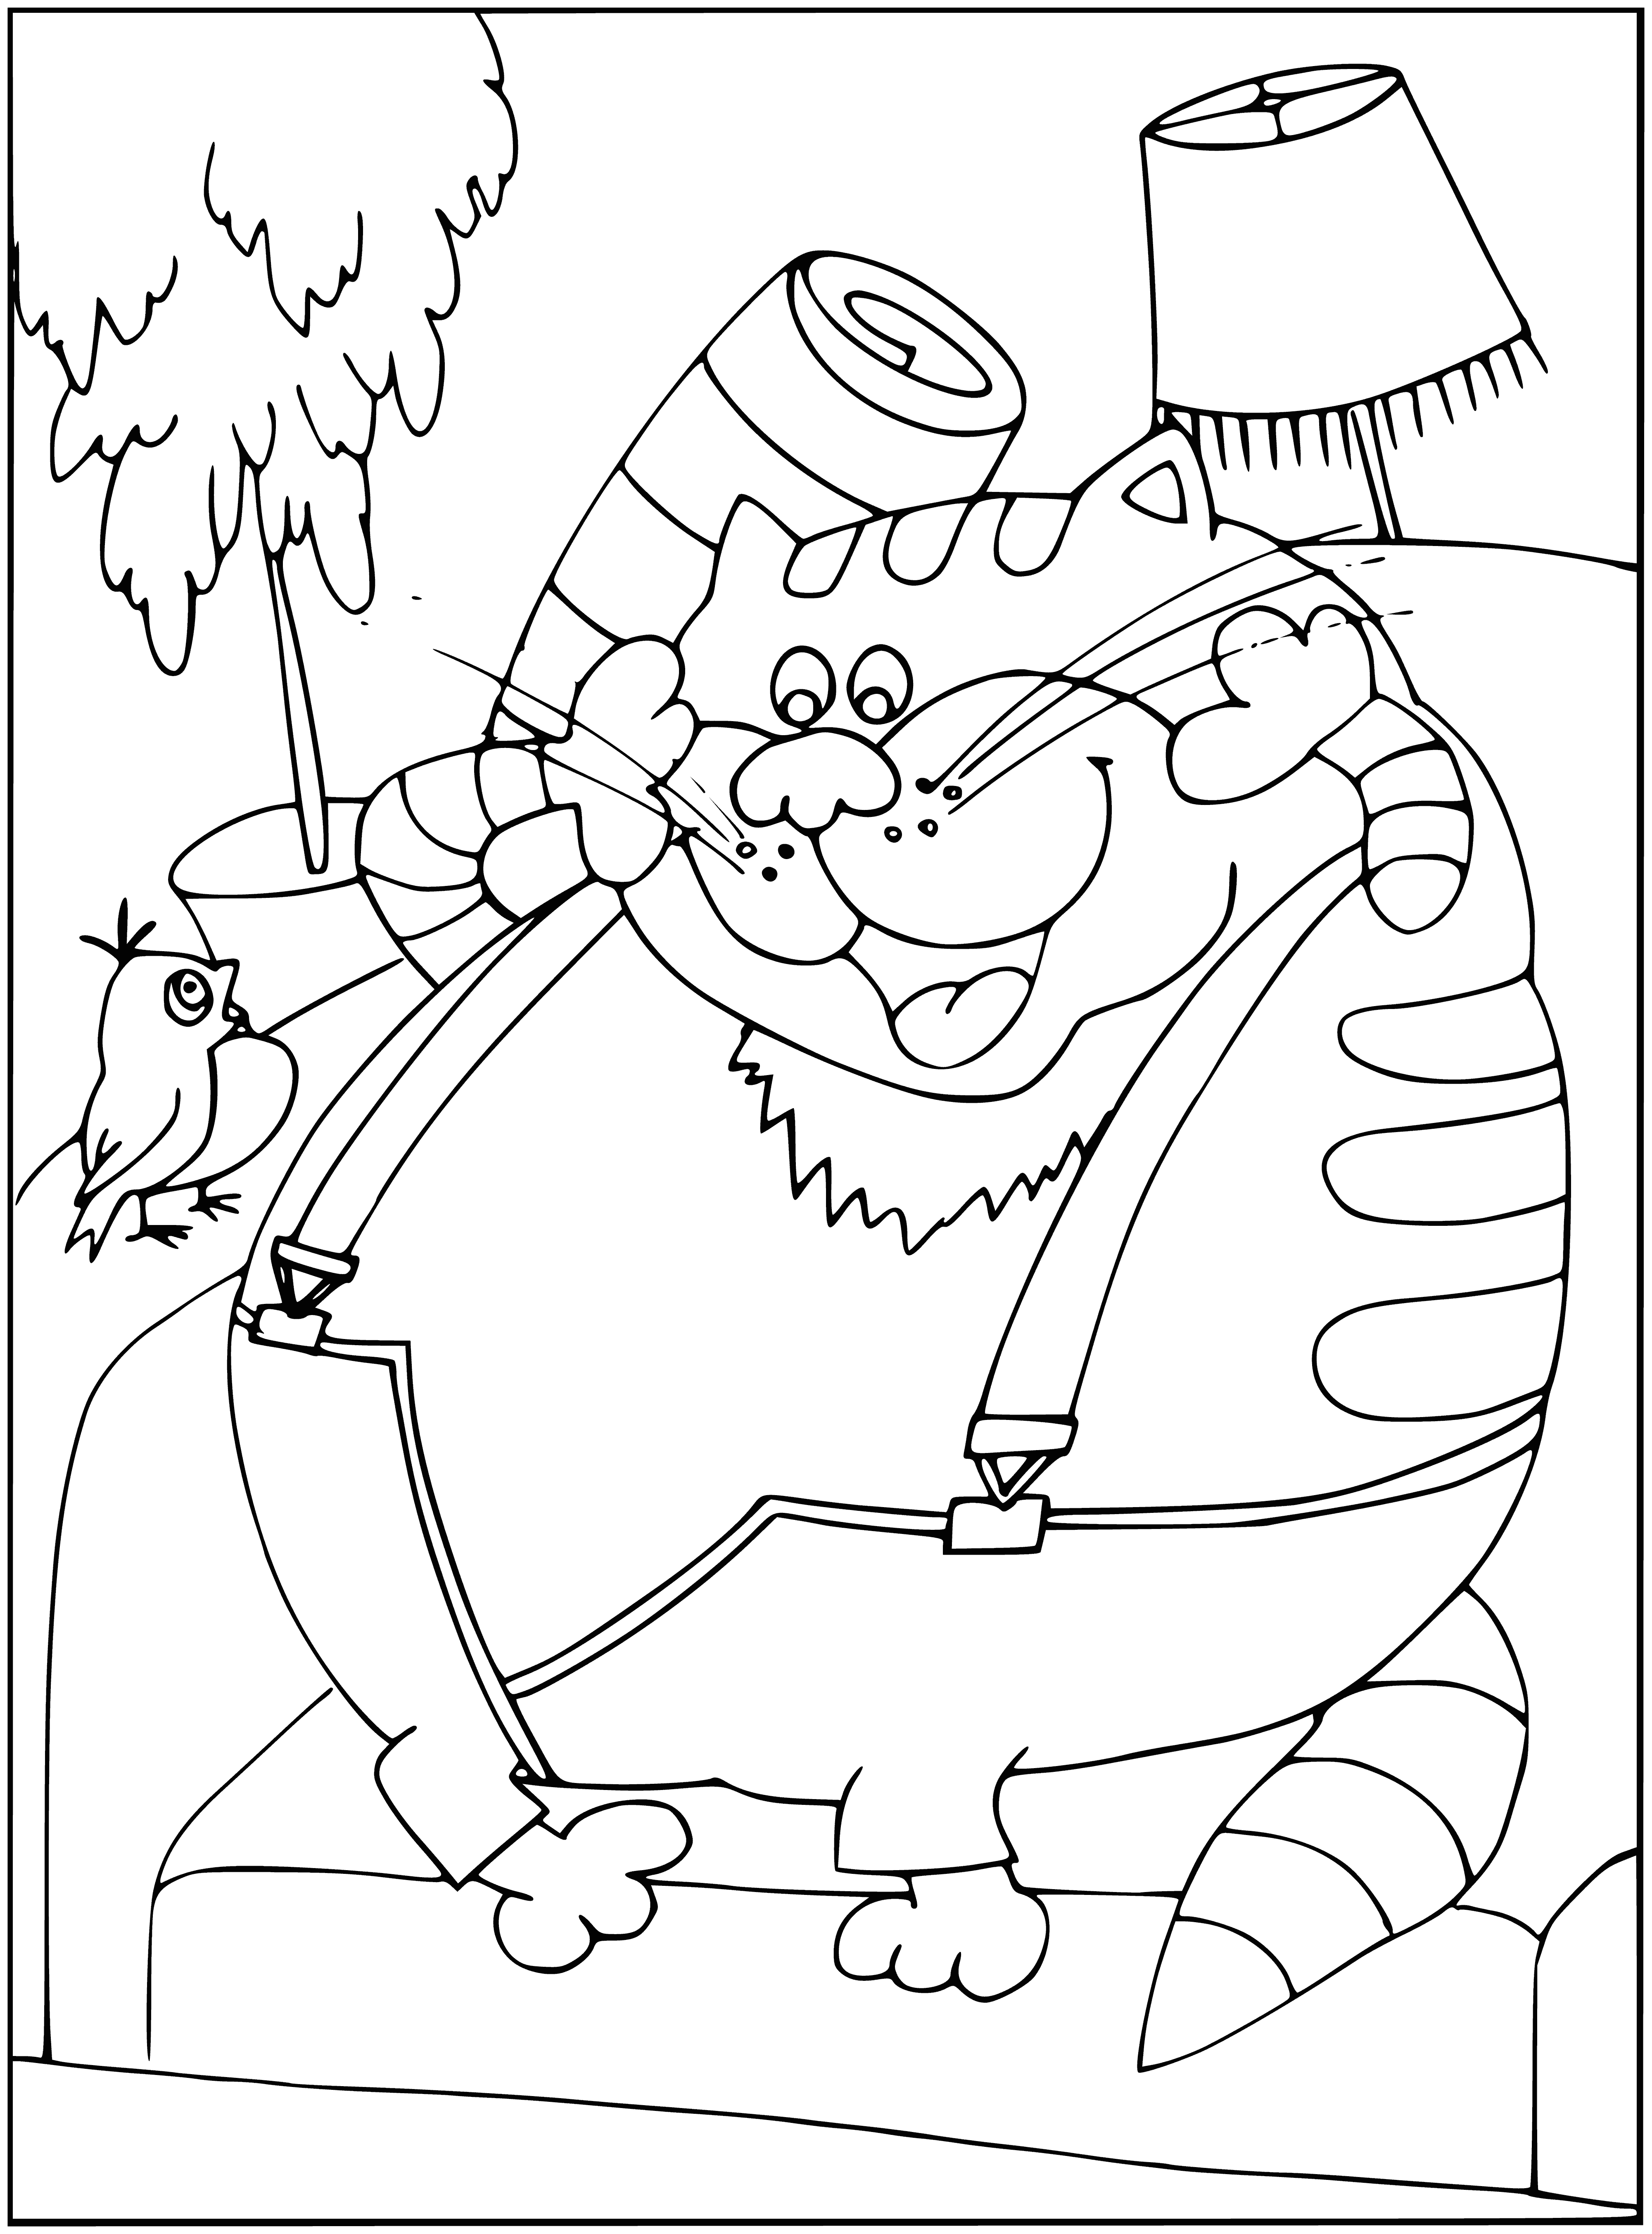 coloring page: A cat, once lost, is found on a doorstep, tail between legs, awaiting a scolding.